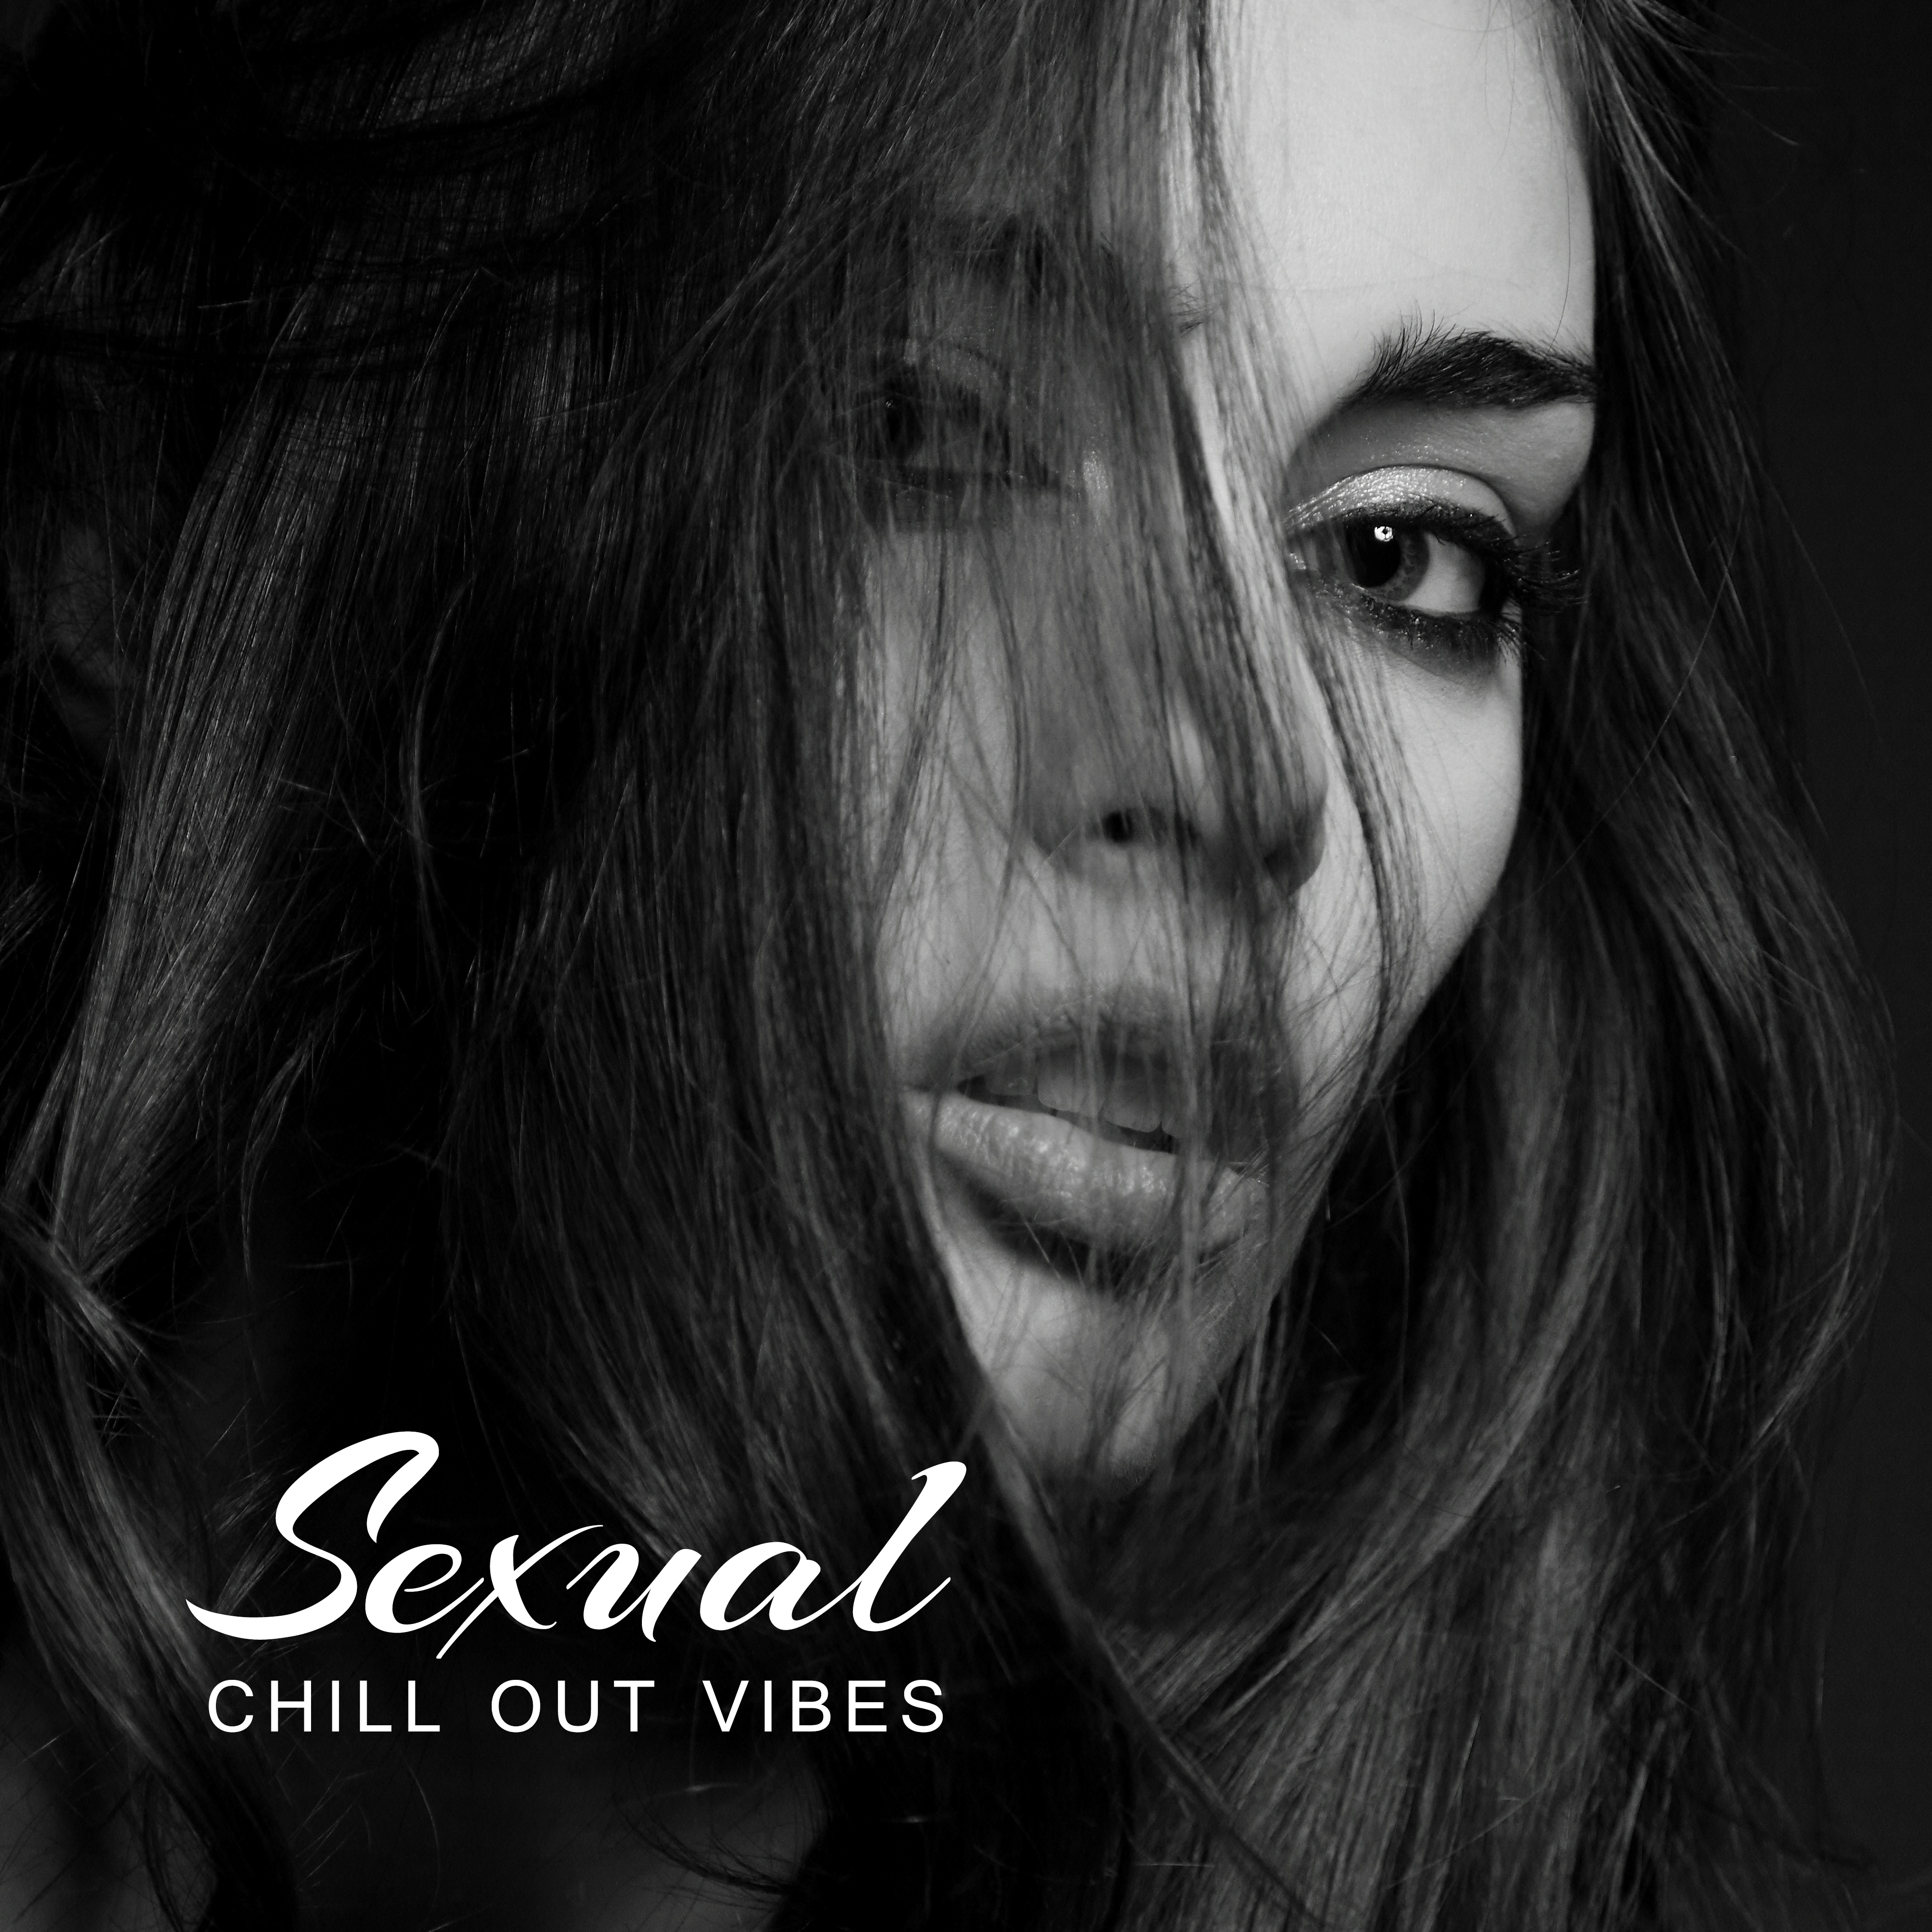 ****** Chill Out Vibes – **** Dance, Ibiza Party Time, Summer Lovers, Hot Chill Out